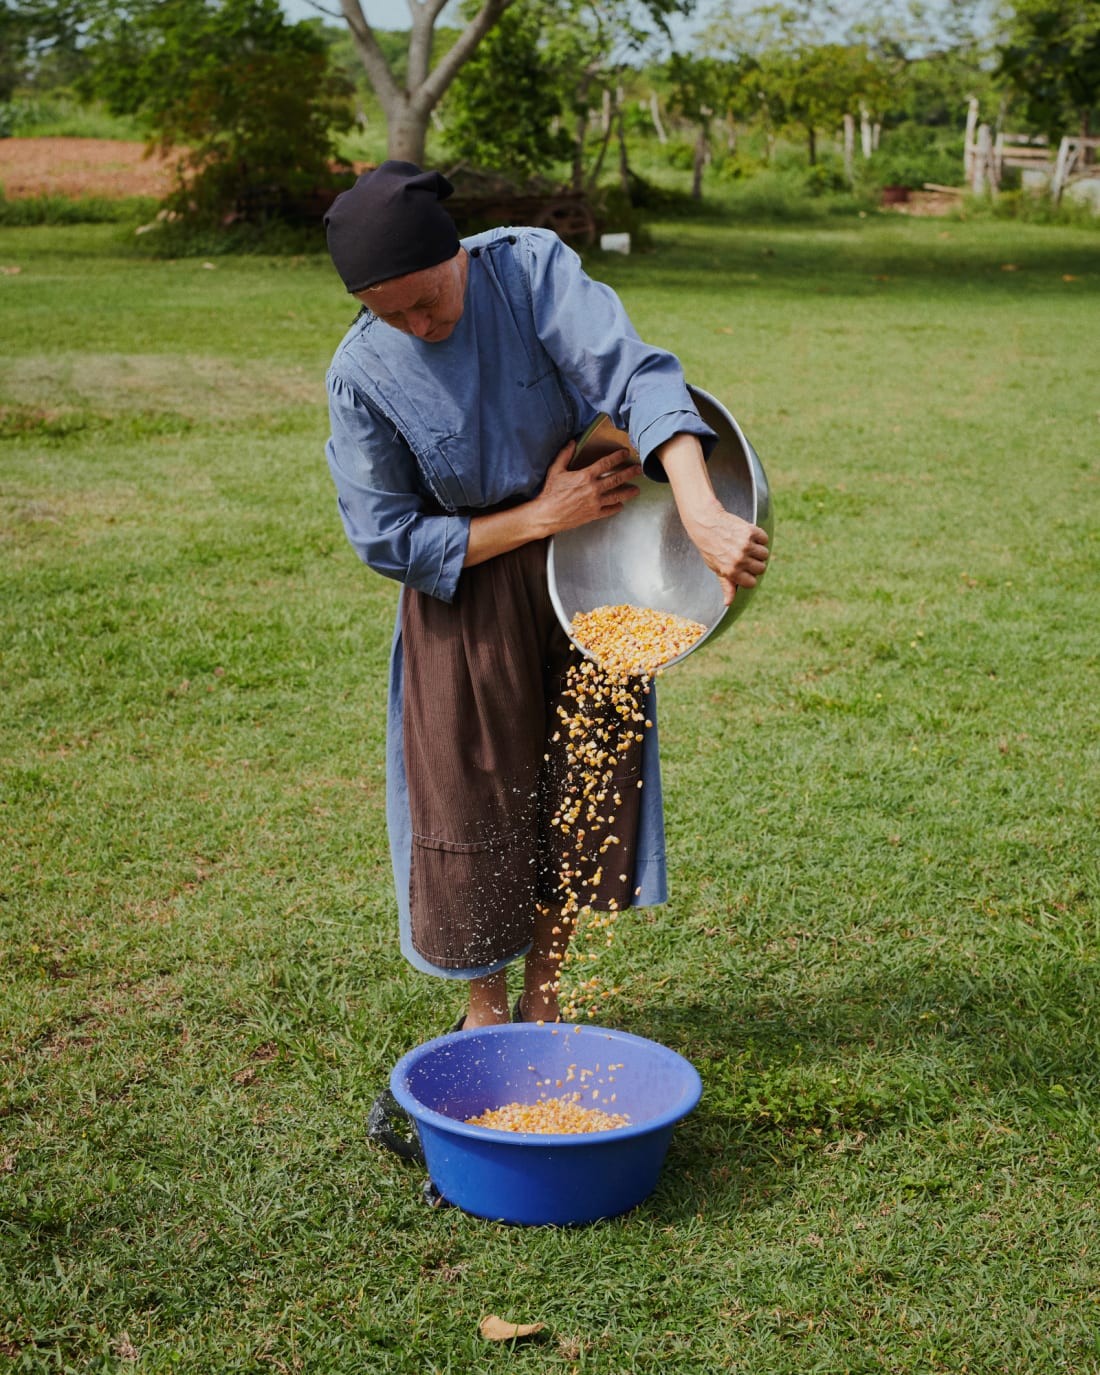 Mennonites colonies are an important source of agricultural produce in Belize.Jake Michaels/Courtesy Setanta Books